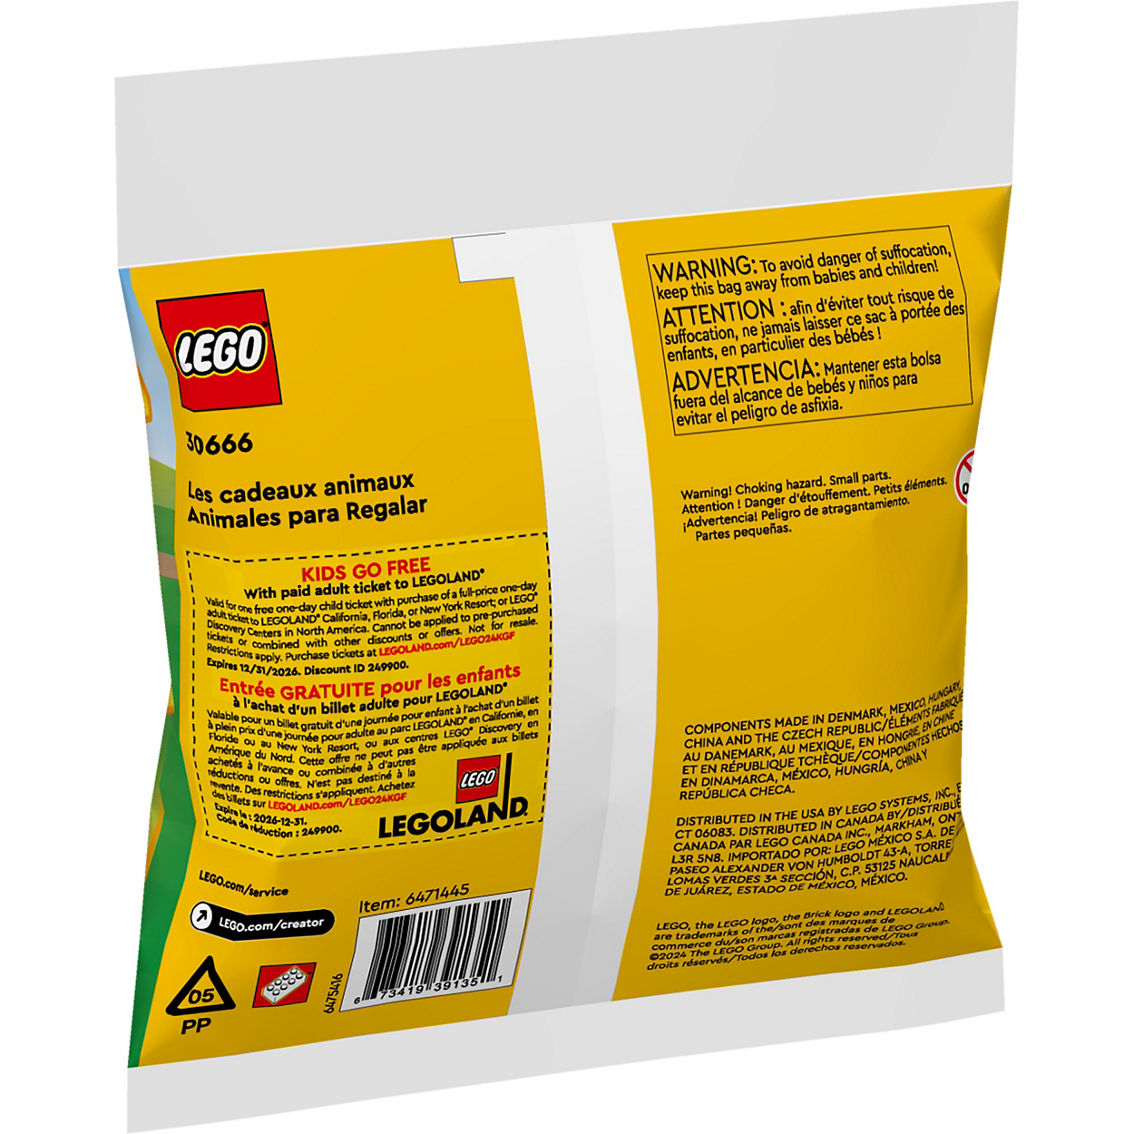 LEGO Creator 3-in-1 Gift Animals 30666 - Image 3 of 3